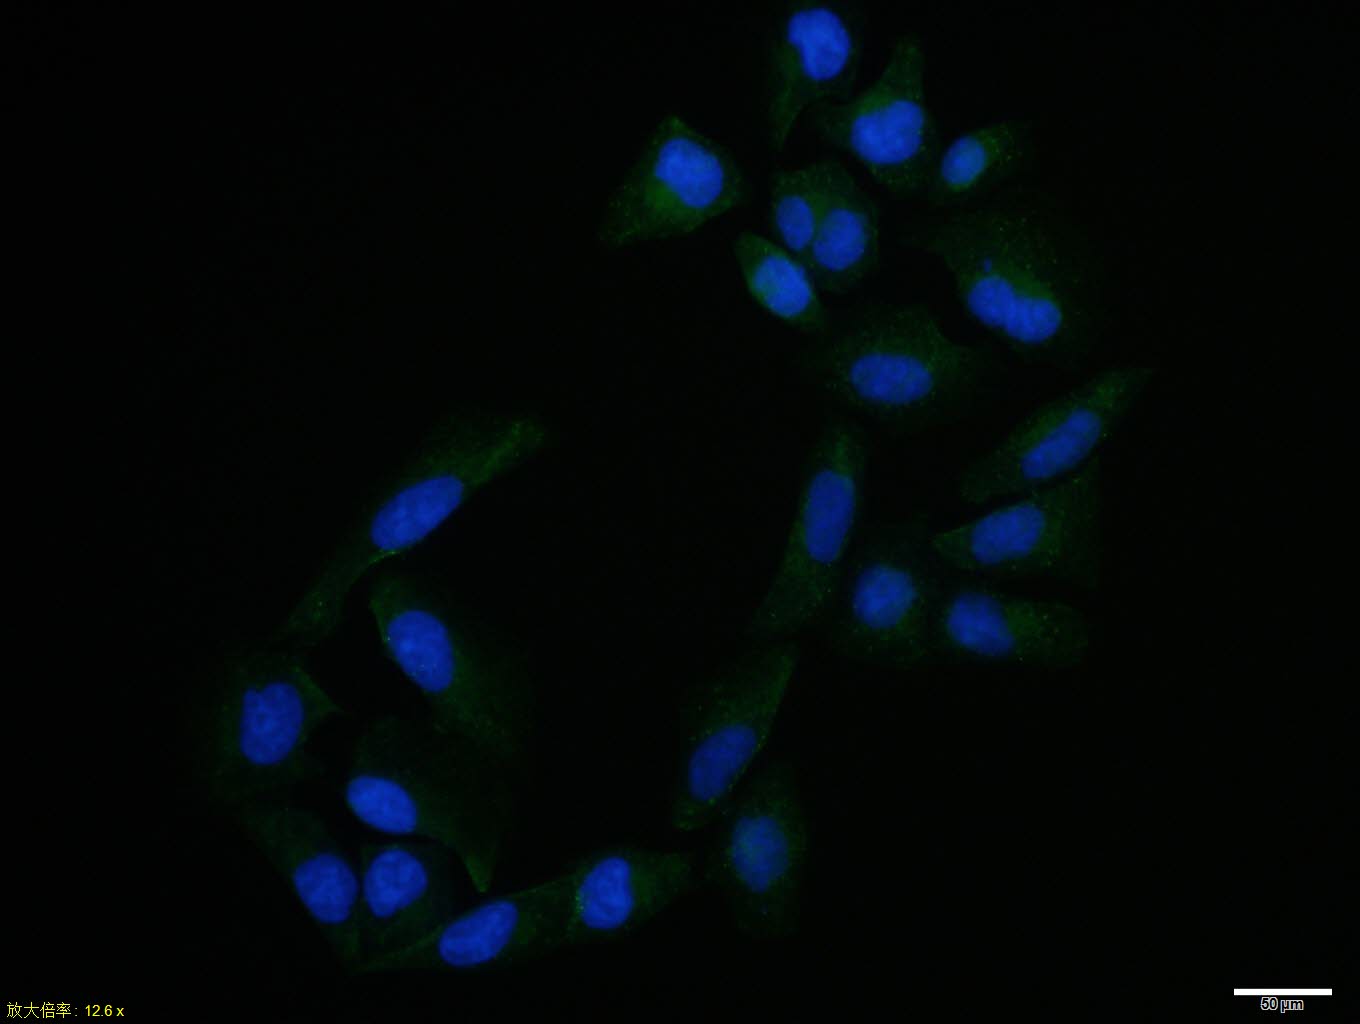 Hela cell; 4% Paraformaldehyde-fixed; Triton X-100 at room temperature for 20 min; Blocking buffer (normal goat serum, C-0005) at 37\u00b0C for 20 min; Antibody incubation with (STAT5) polyclonal Antibody, Unconjugated (bs-1142R) 1:100, 90 minutes at 37\u00b0C; followed by a conjugated Goat Anti-Rabbit IgG antibody at 37\u00b0C for 90 minutes, DAPI (blue, C02-04002) was used to stain the cell nuclei.